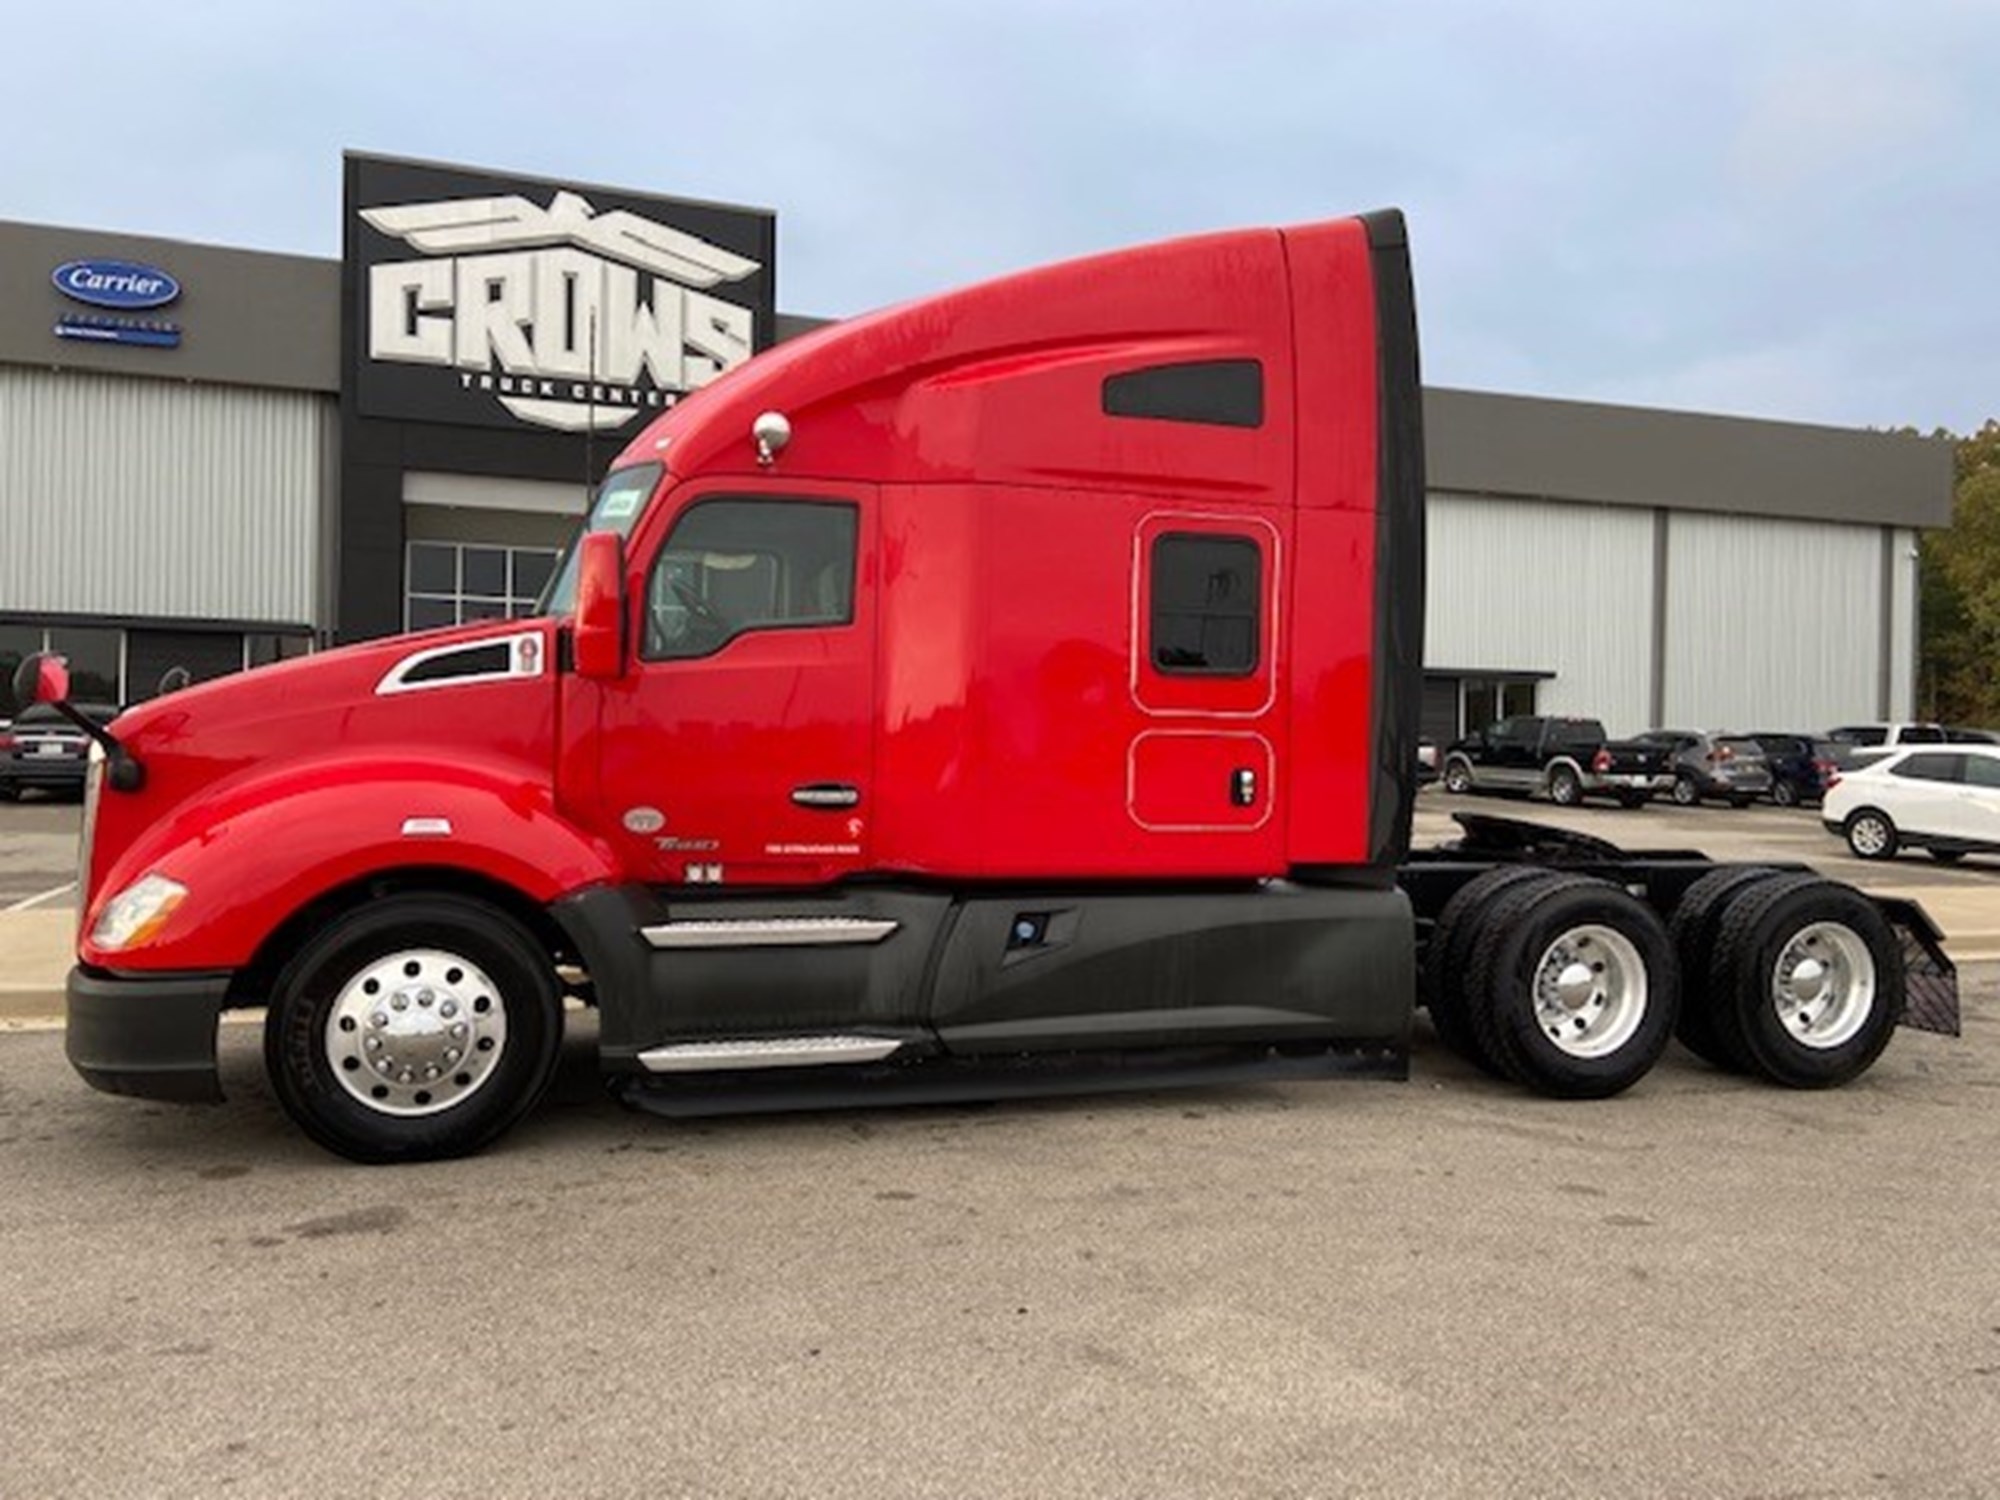 USED 2019 KENWORTH T680E DAYCAB TRUCK #1581